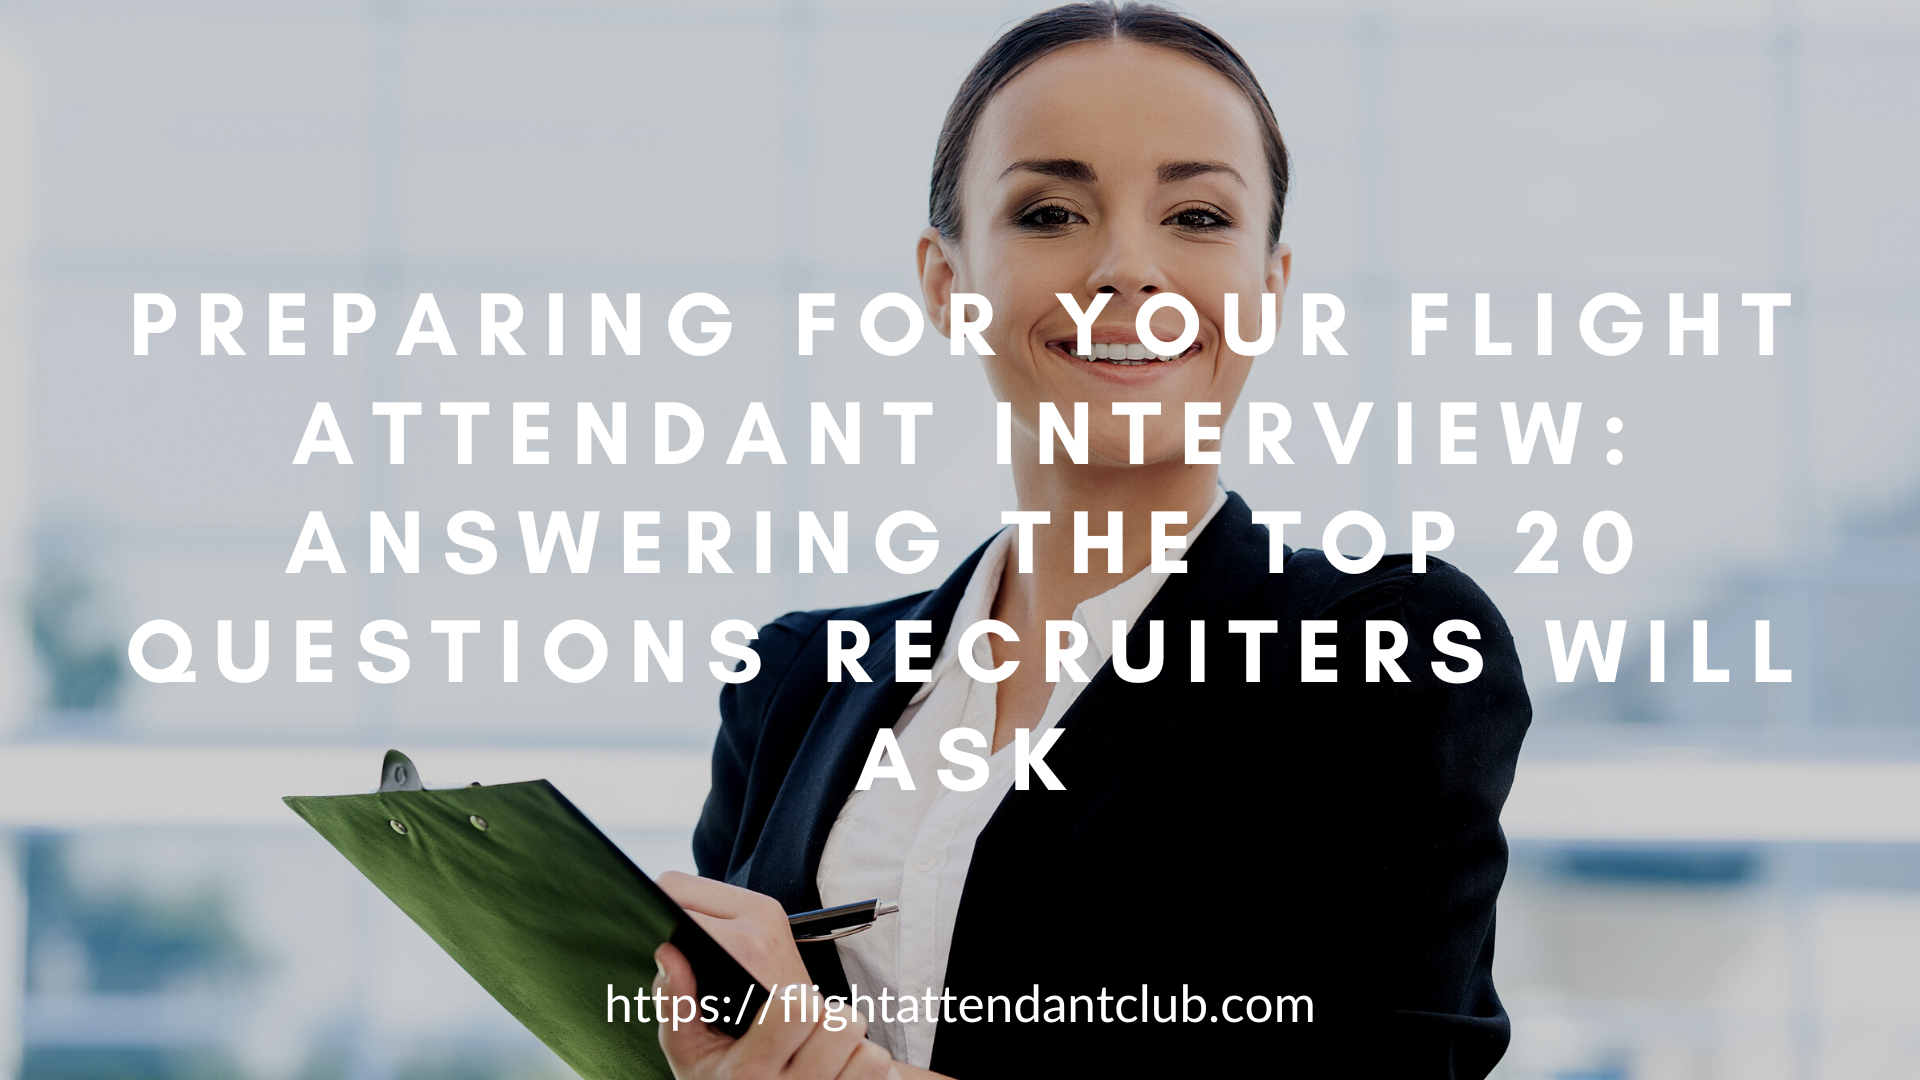 Preparing for Your Flight Attendant Interview: Answering the Top 20 Questions Recruiters Will Ask